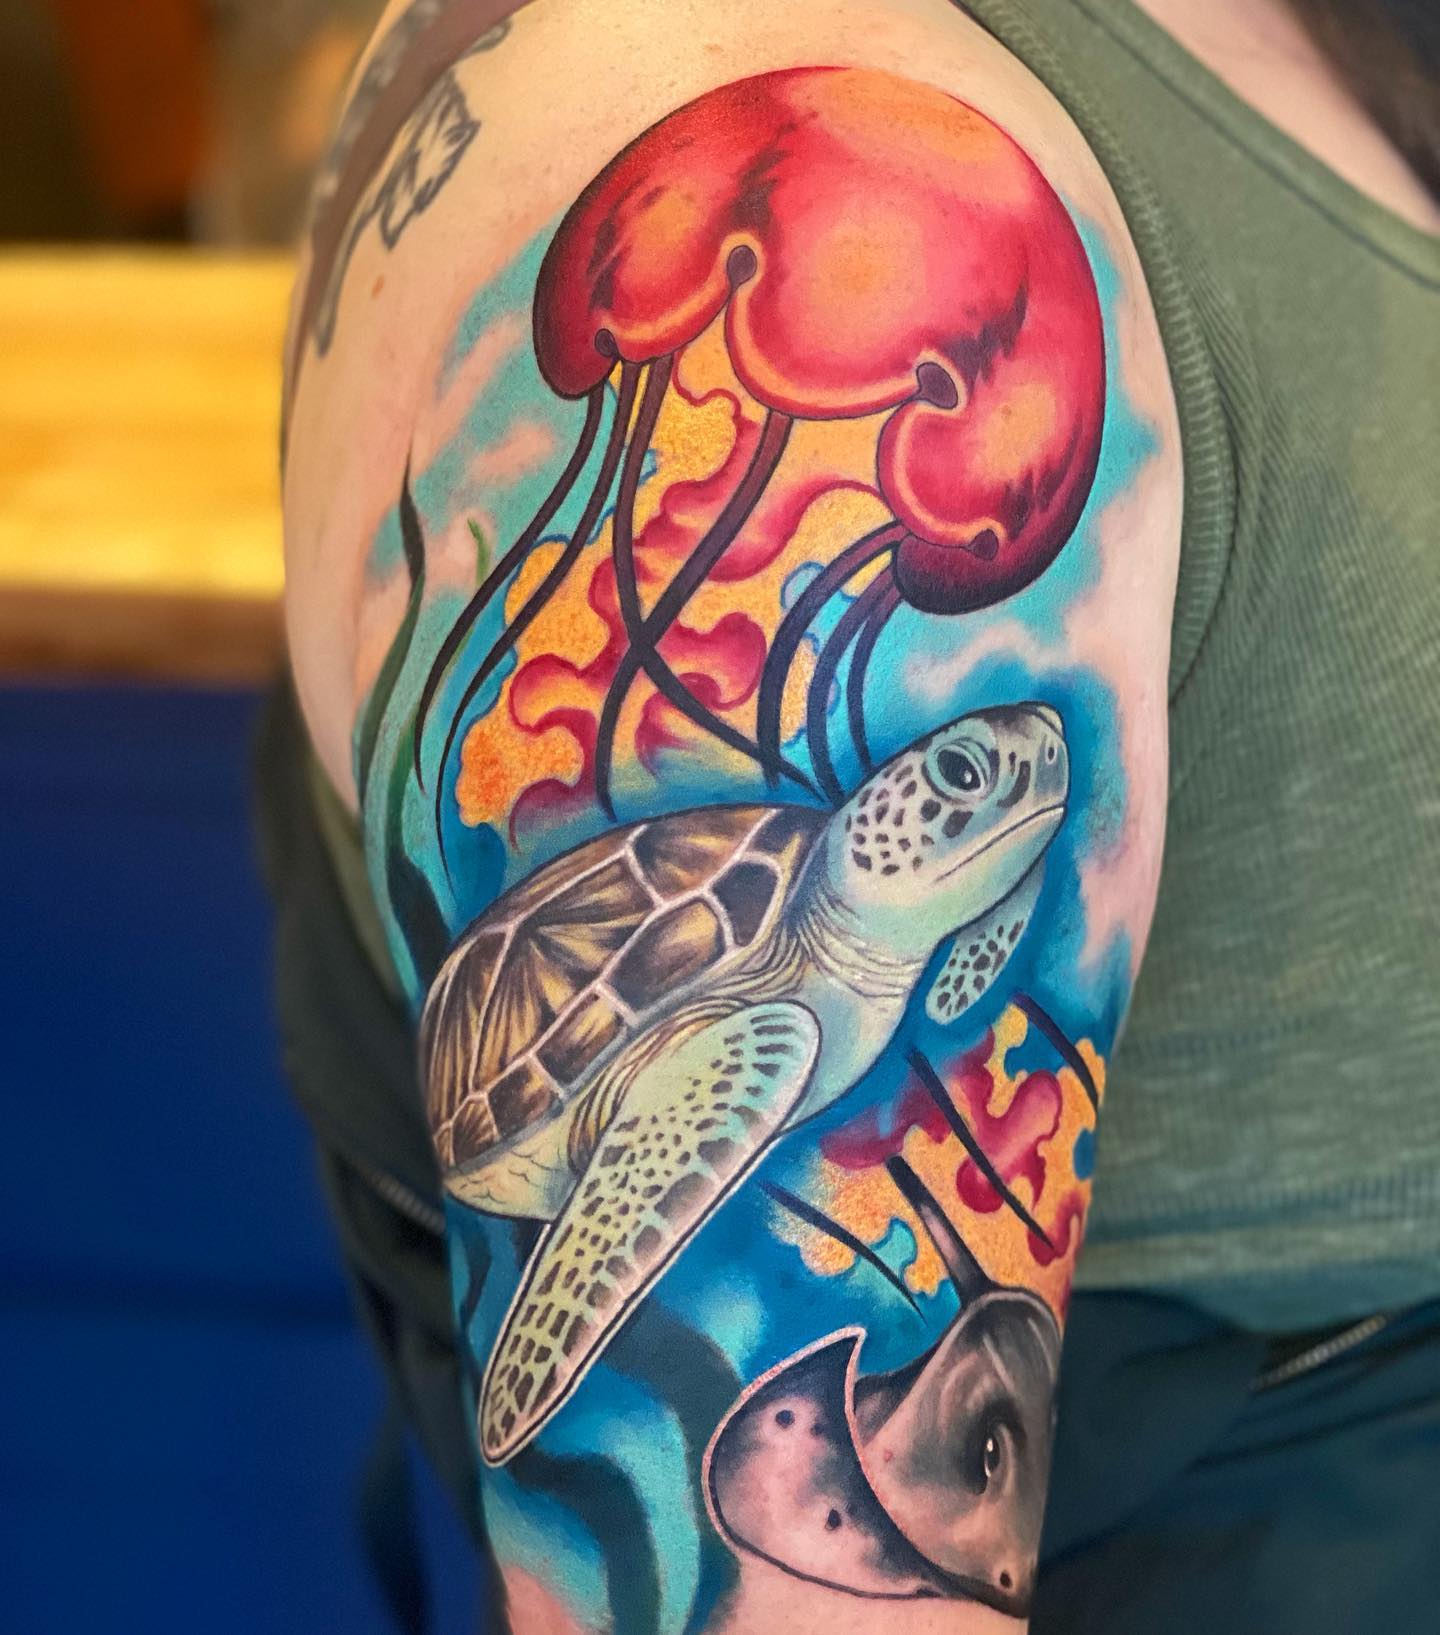 The colorful sea turtle and jelly fish tattoo is very beautiful! I love the combination of the two and how they look together. It's very unique and eye-catching.